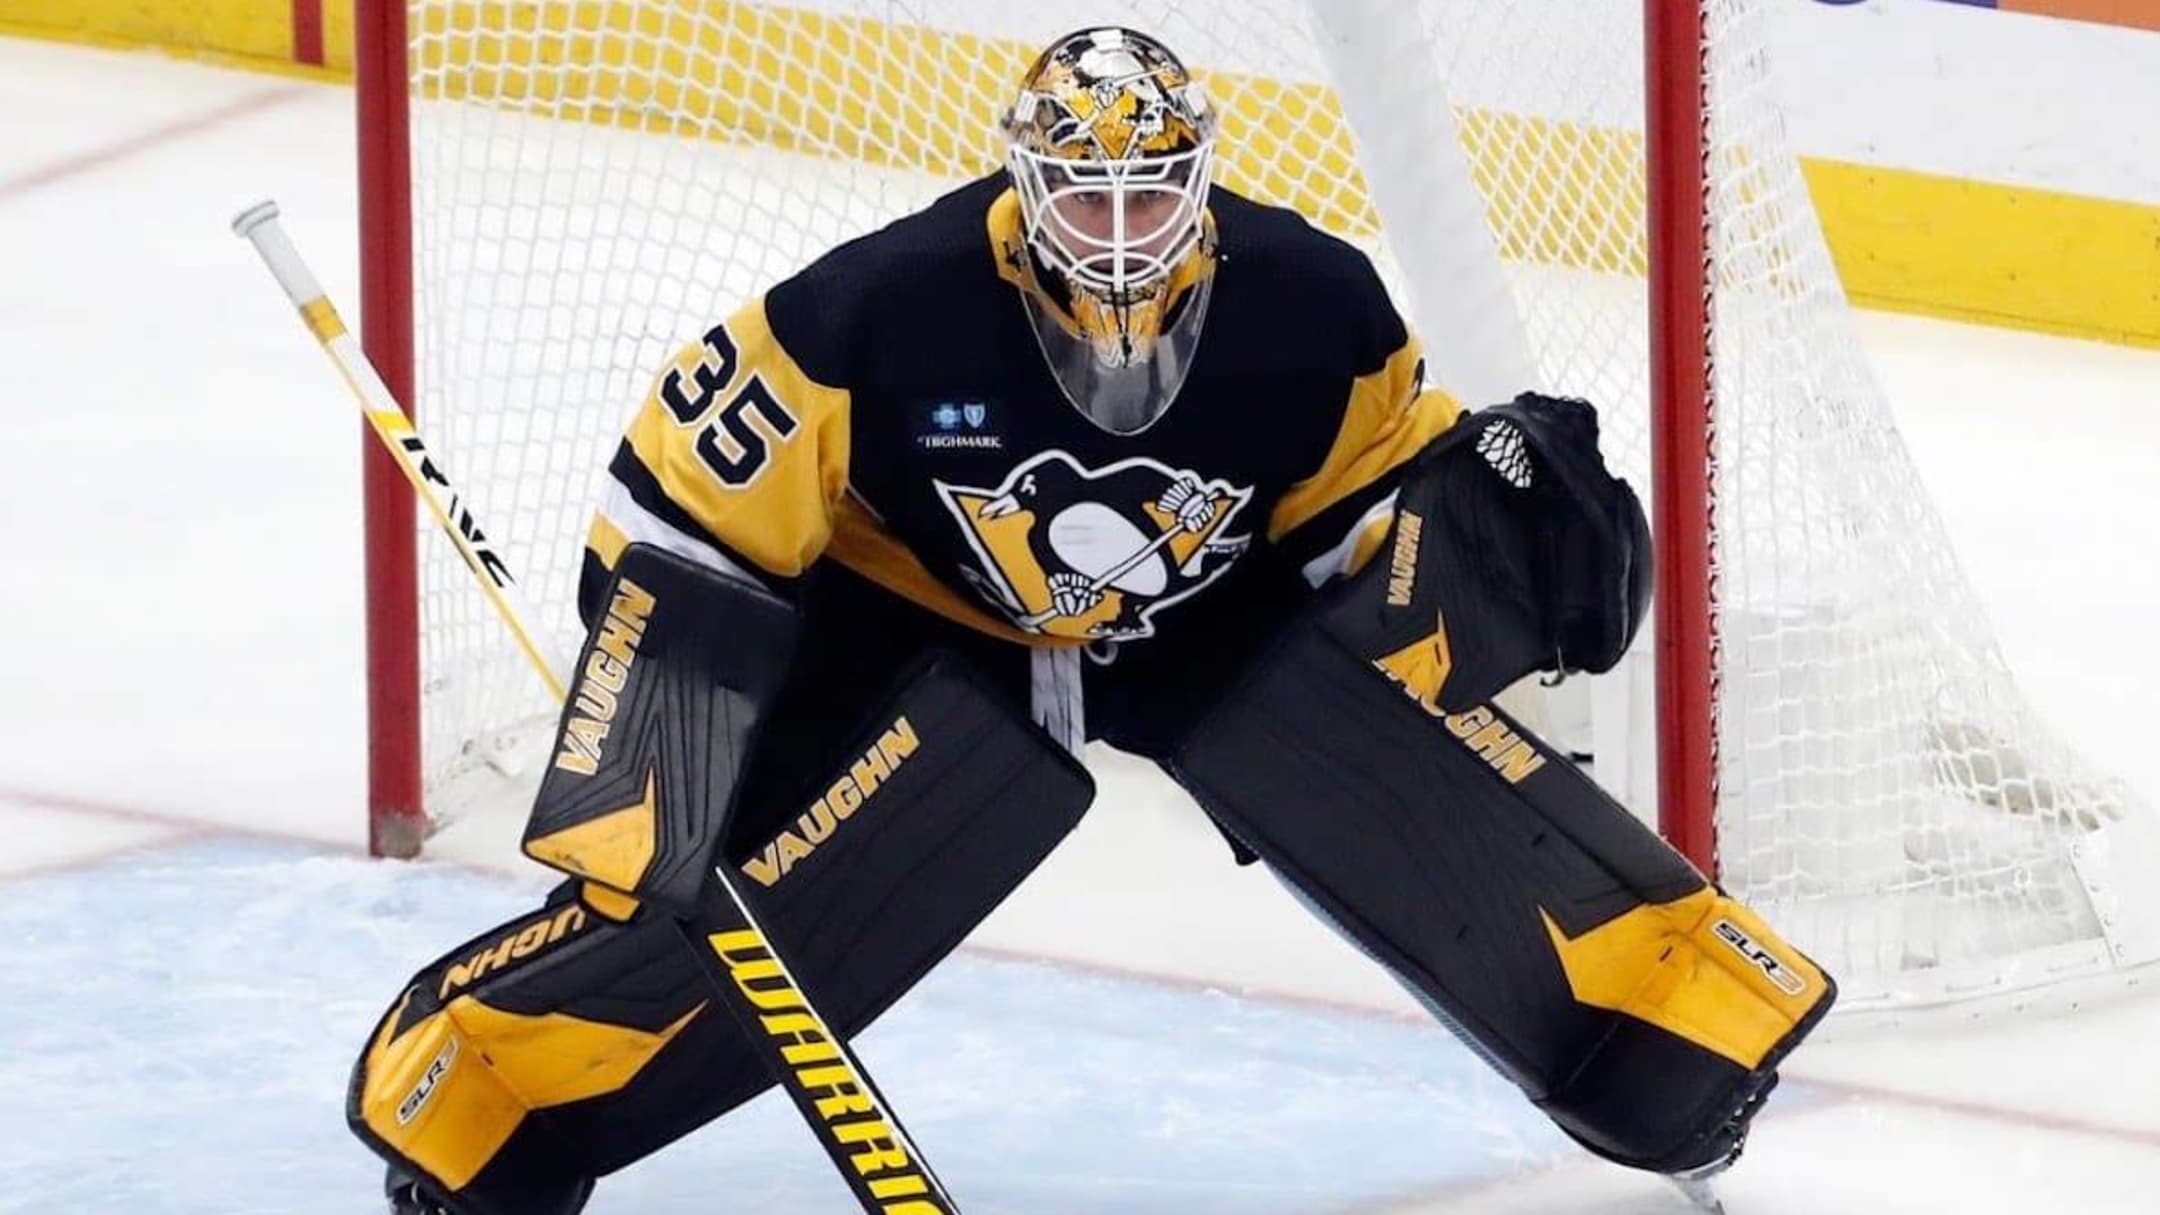 Penguins don't have many options behind Jarry in net